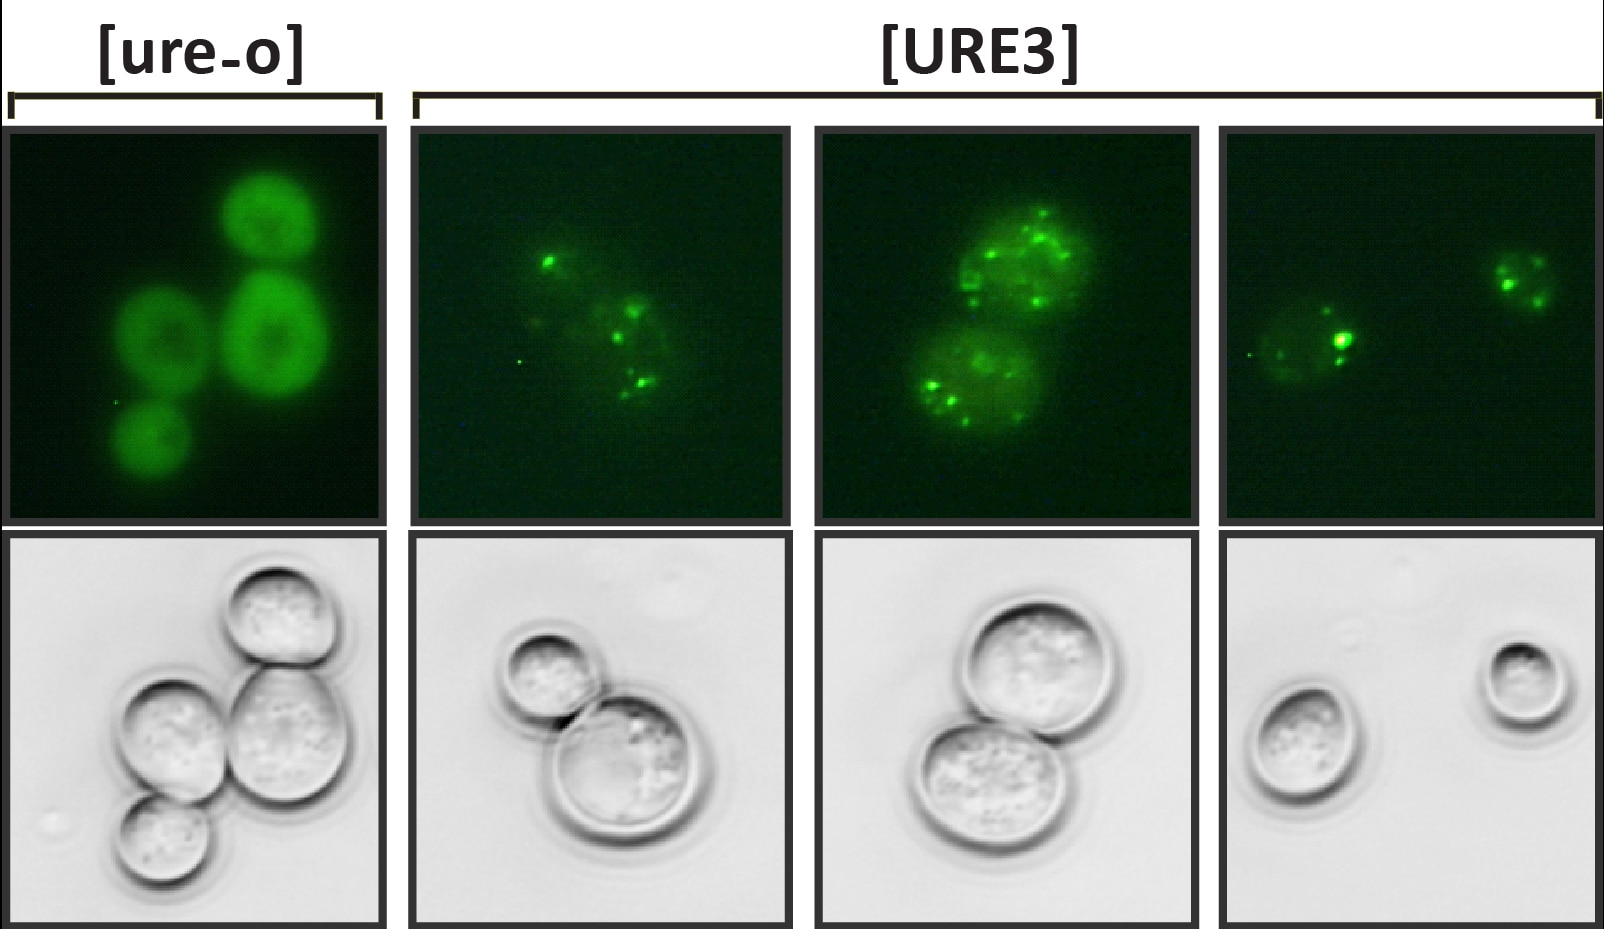 Photos of Ure2-GFP aggregates in a URE3 prion cell